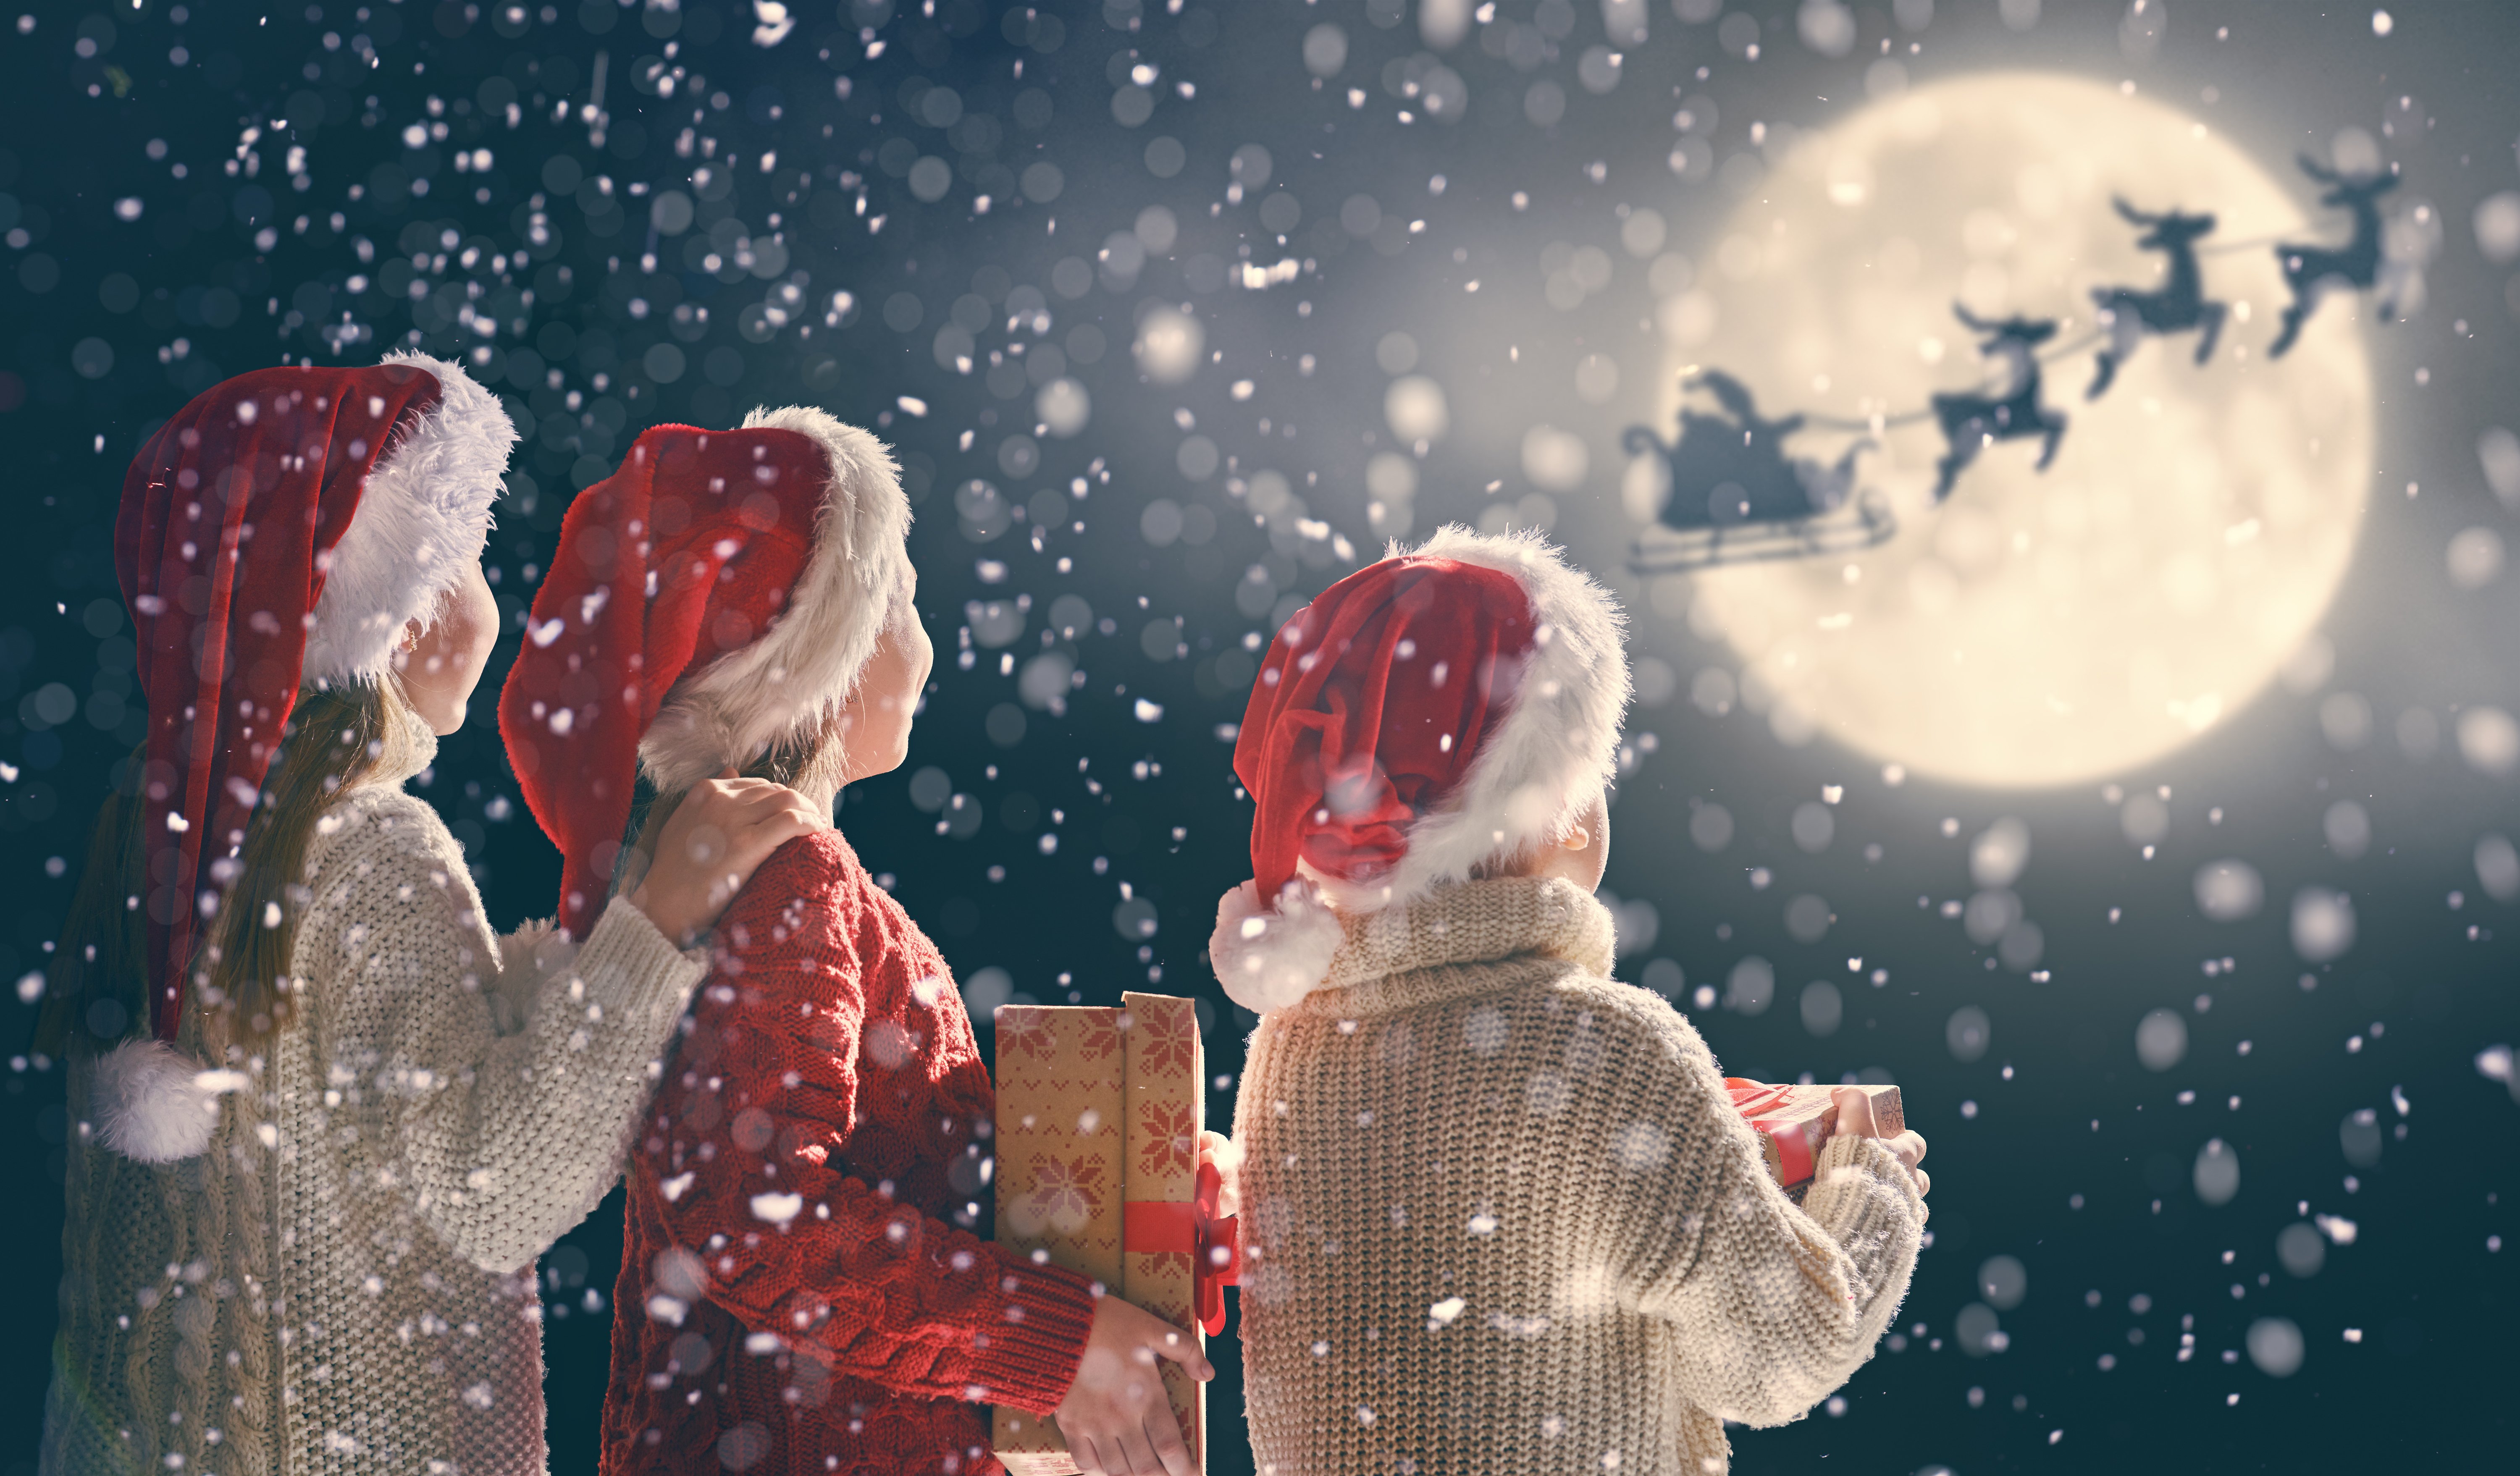 Kids celebrating Christmas and watching Santa from afar | Photo: Shutterstock